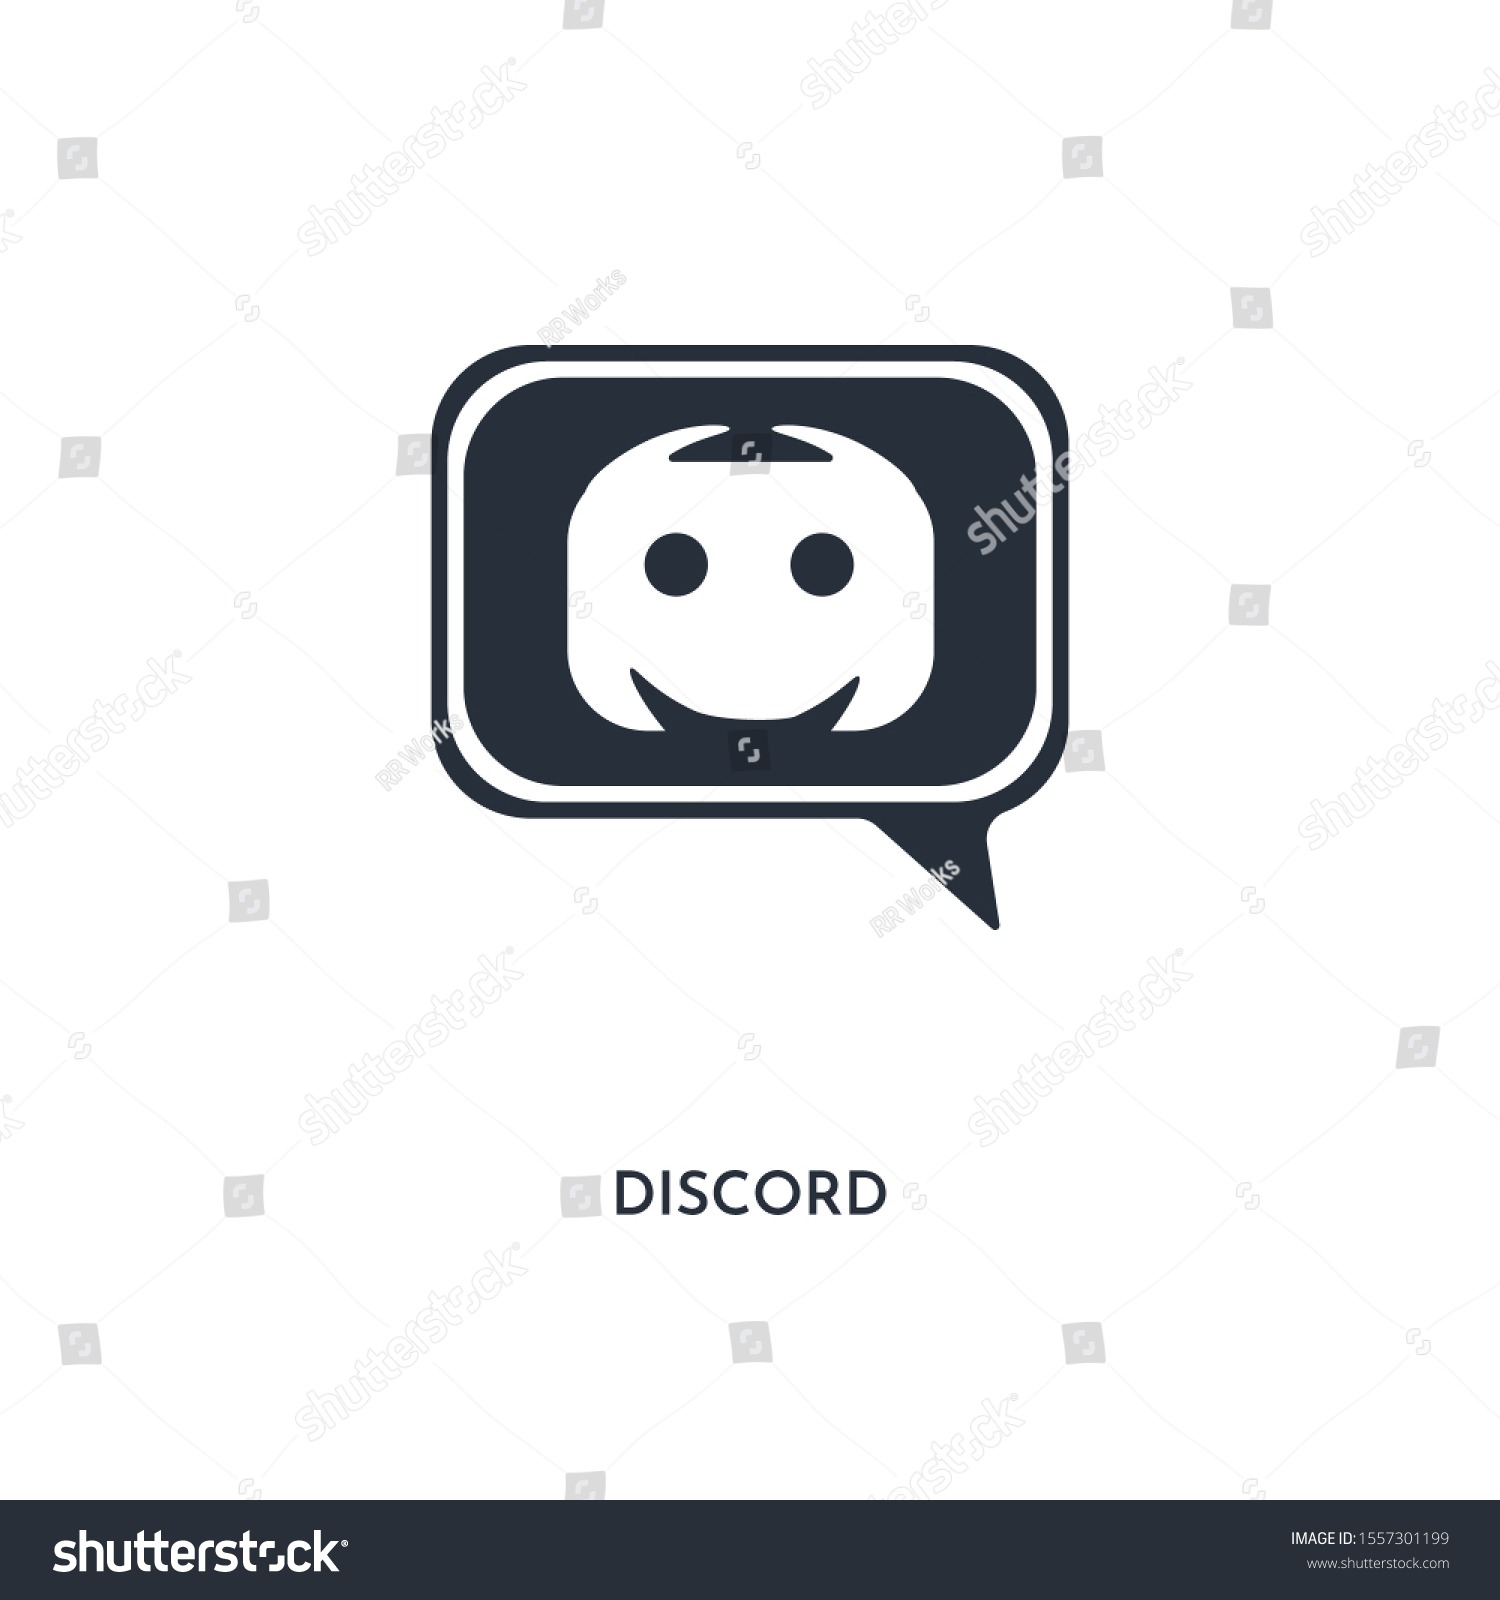 Discord Icon Simple Element Illustration Isolated Stock Vector Royalty Free